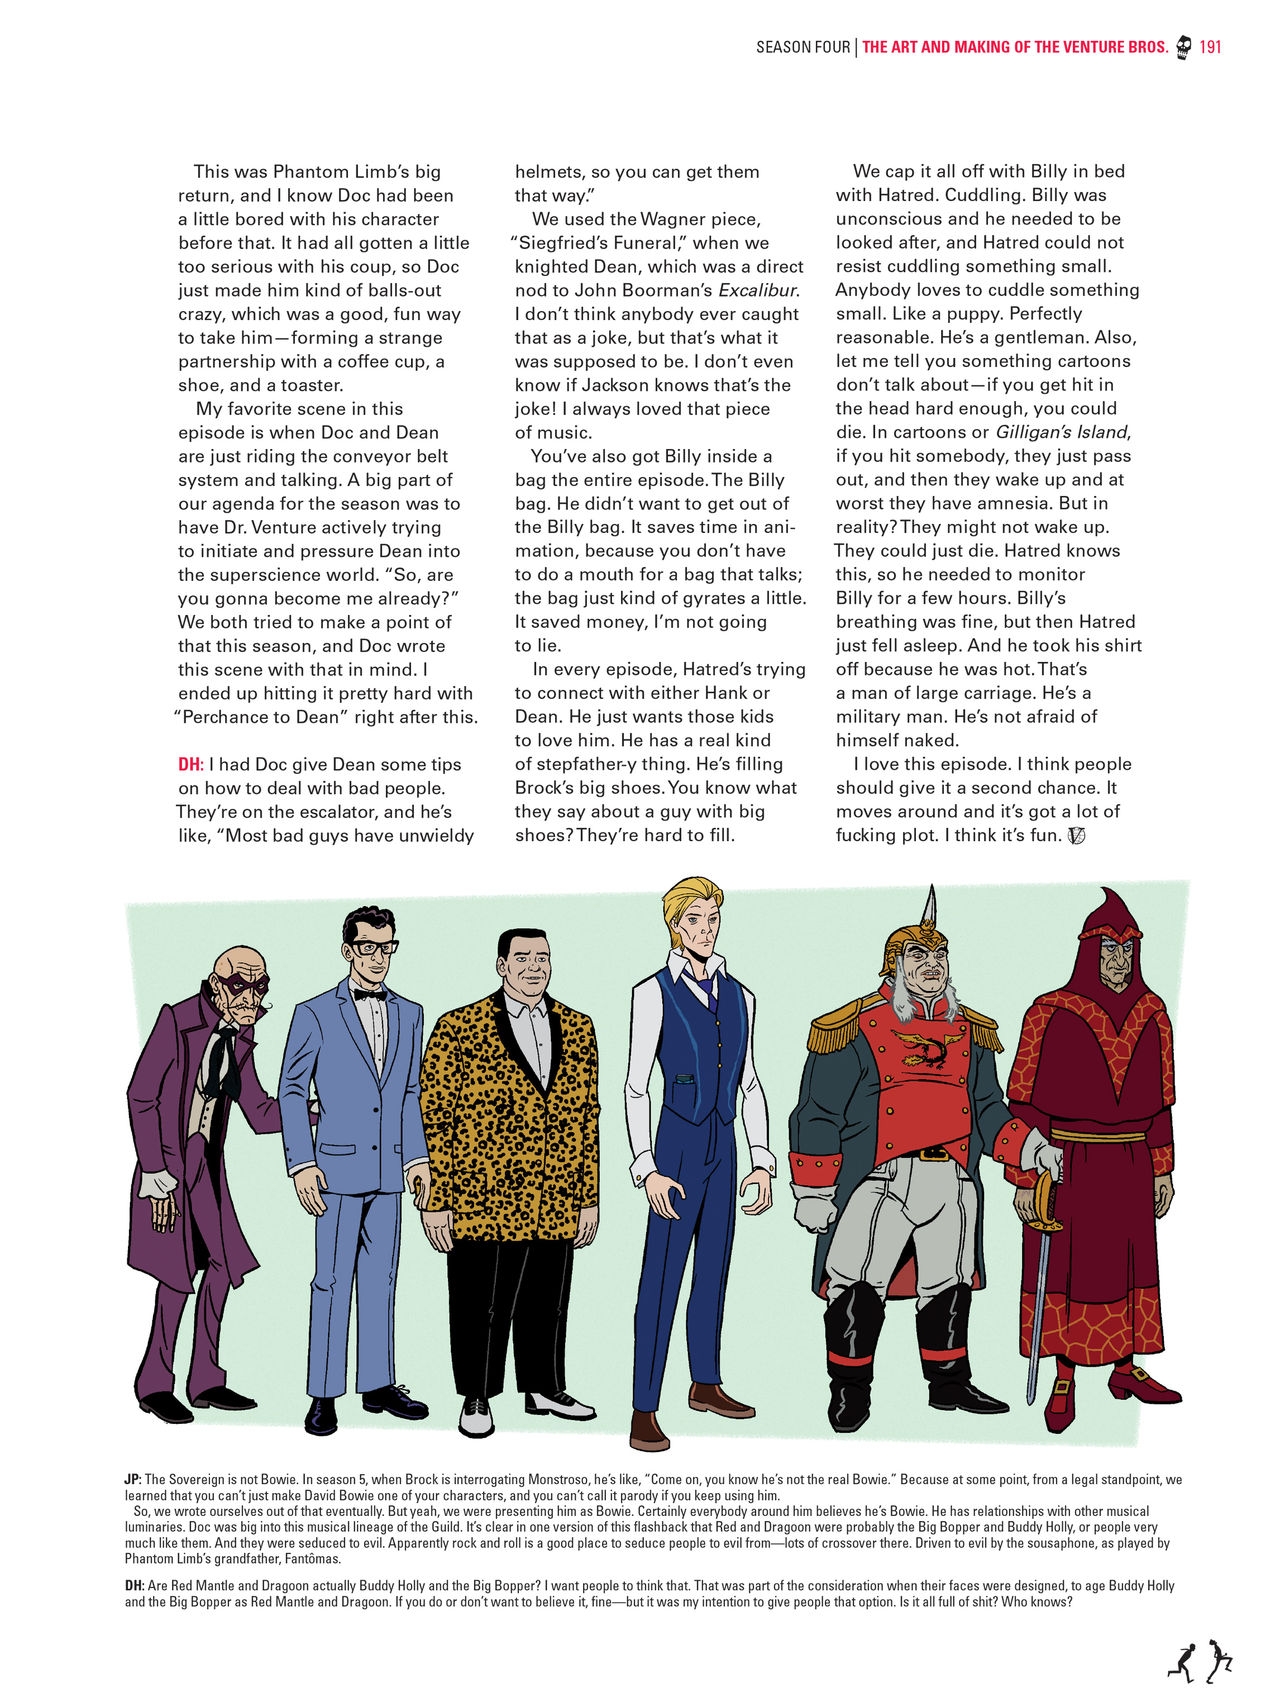 Go Team Venture! - The Art and Making of the Venture Bros 189